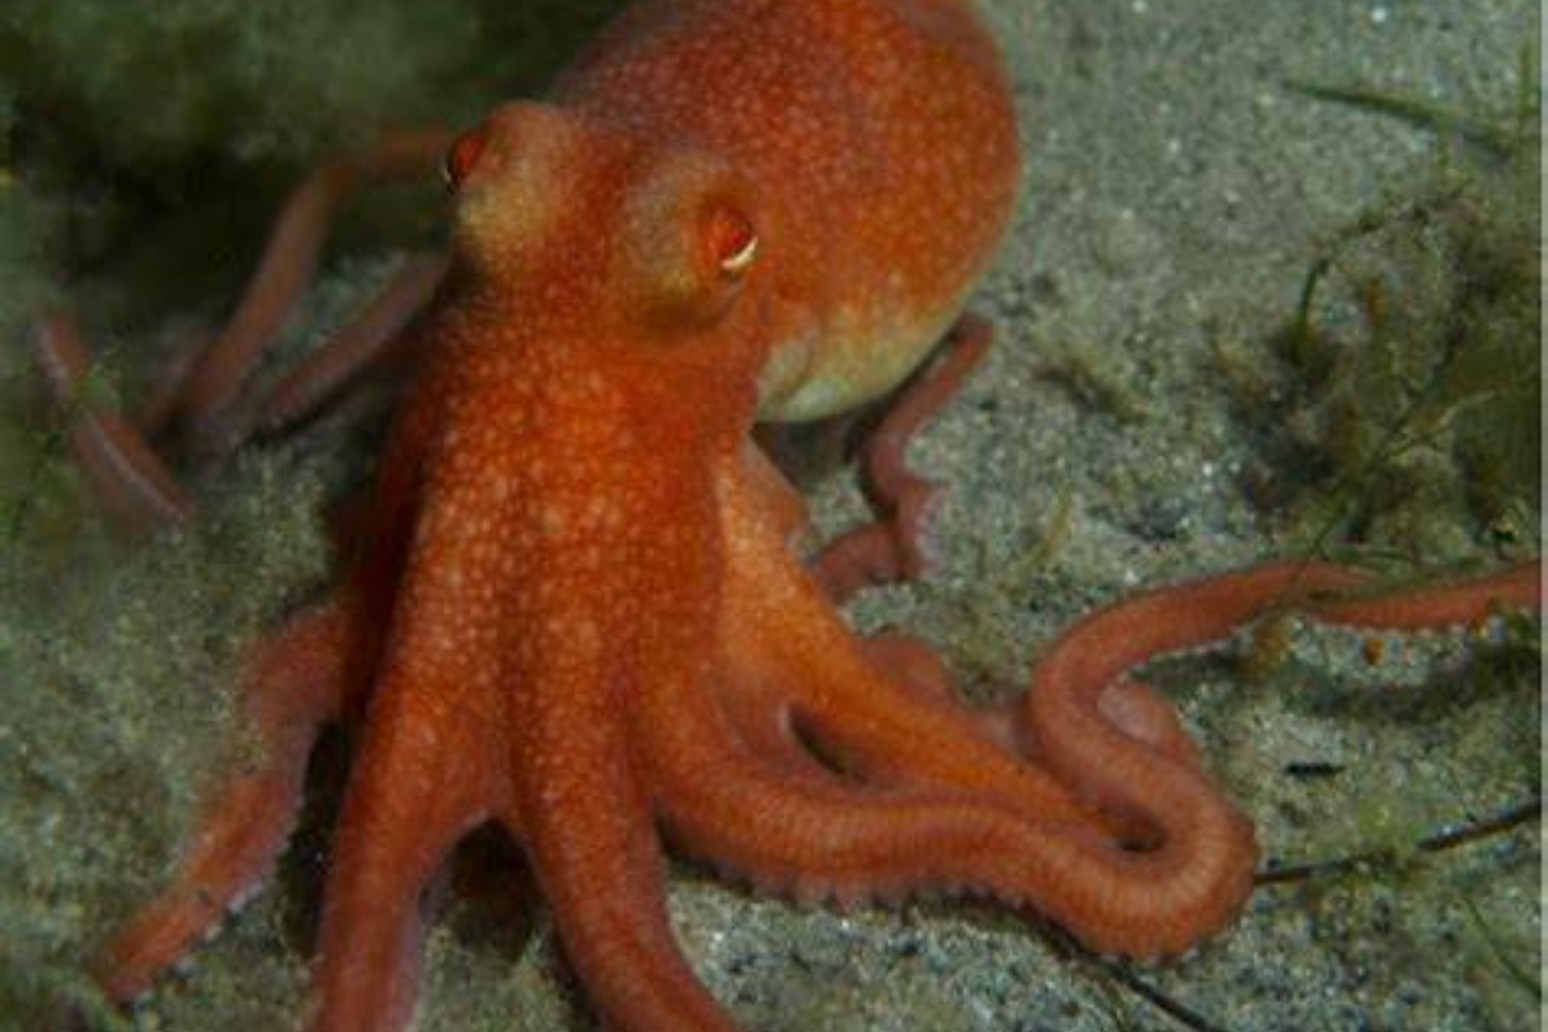 Lobsters, crabs, and octopuses can feel pain too, study finds 